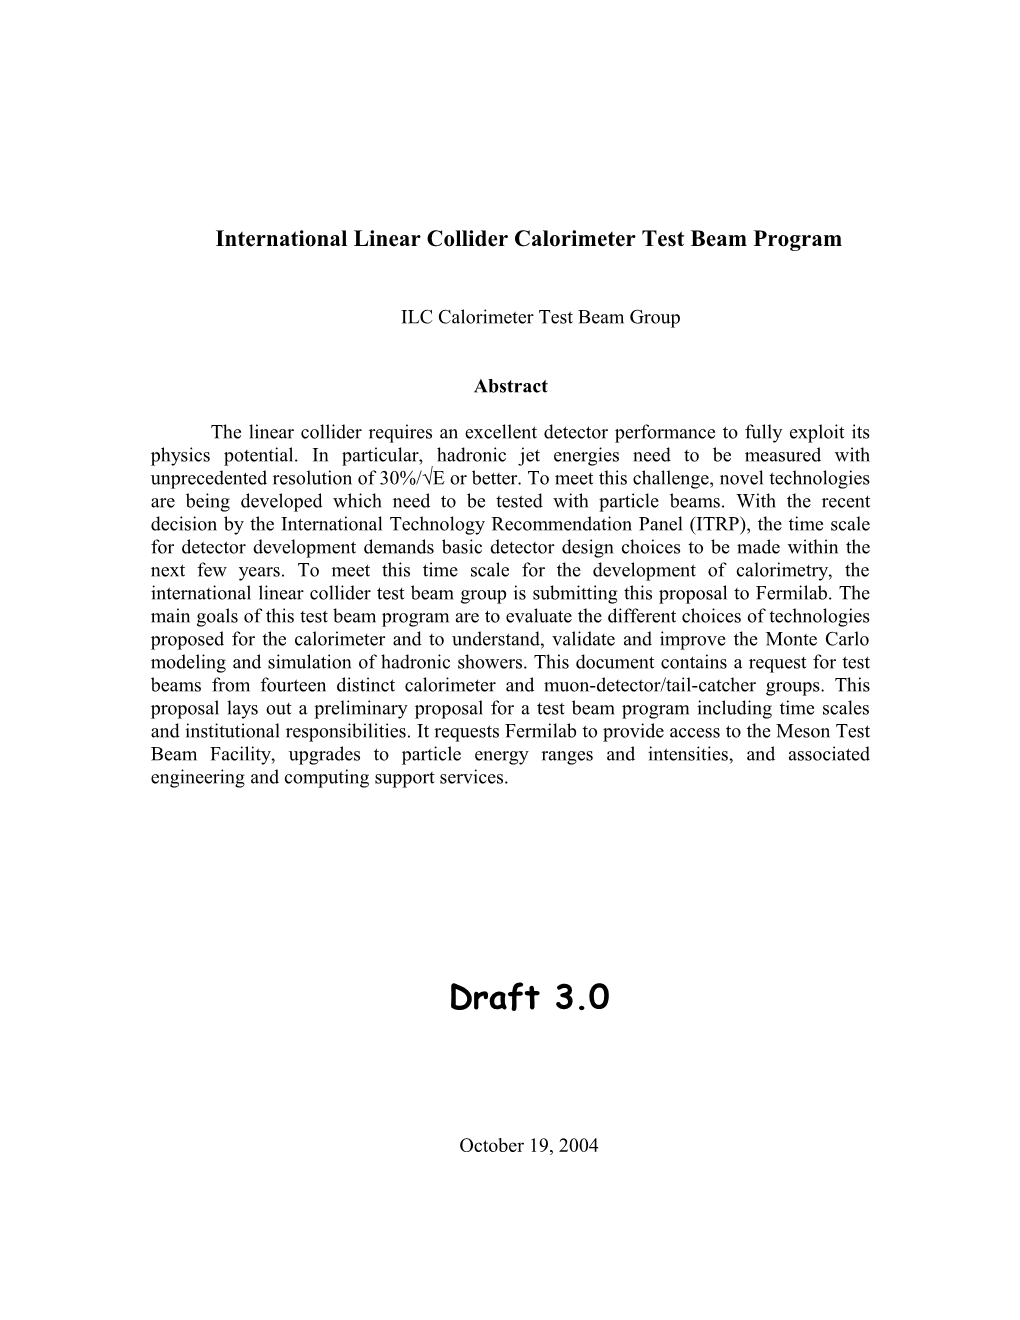 A Proposal to Establish the Linear Collider Detector Test Facility